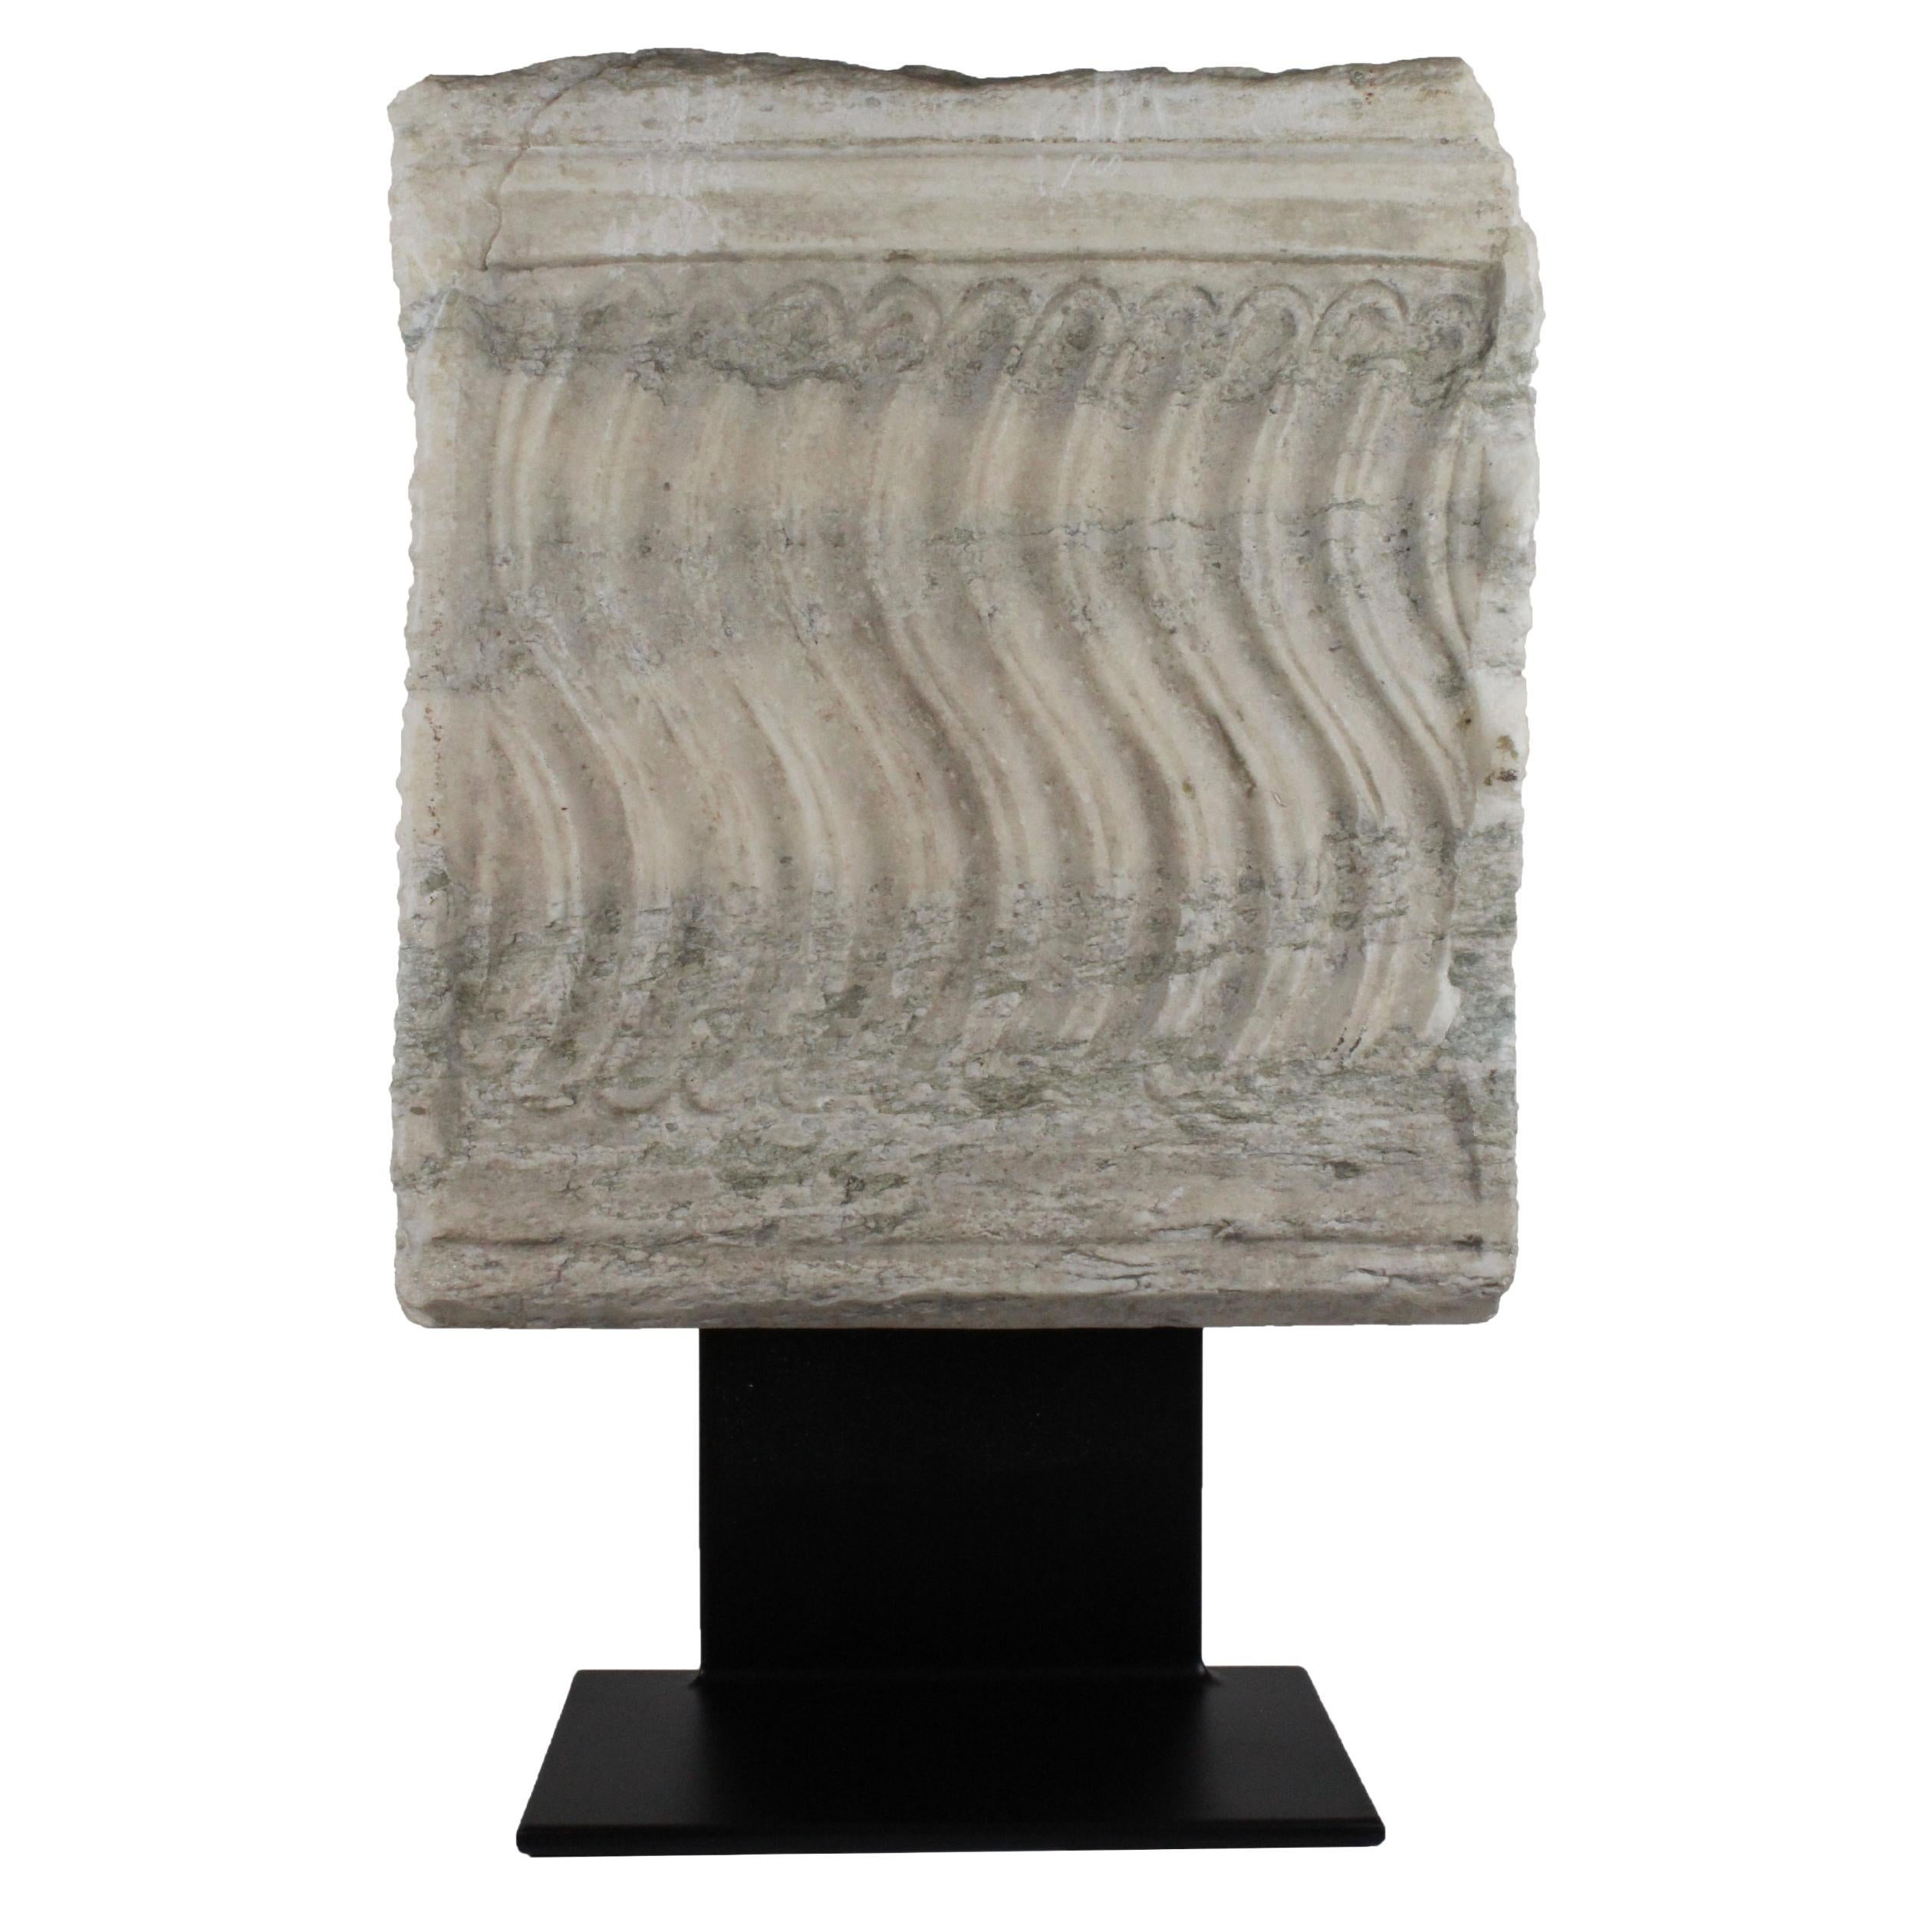 Roman Antique Marble Sculpture, 2nd Century Ad, South of France For Sale